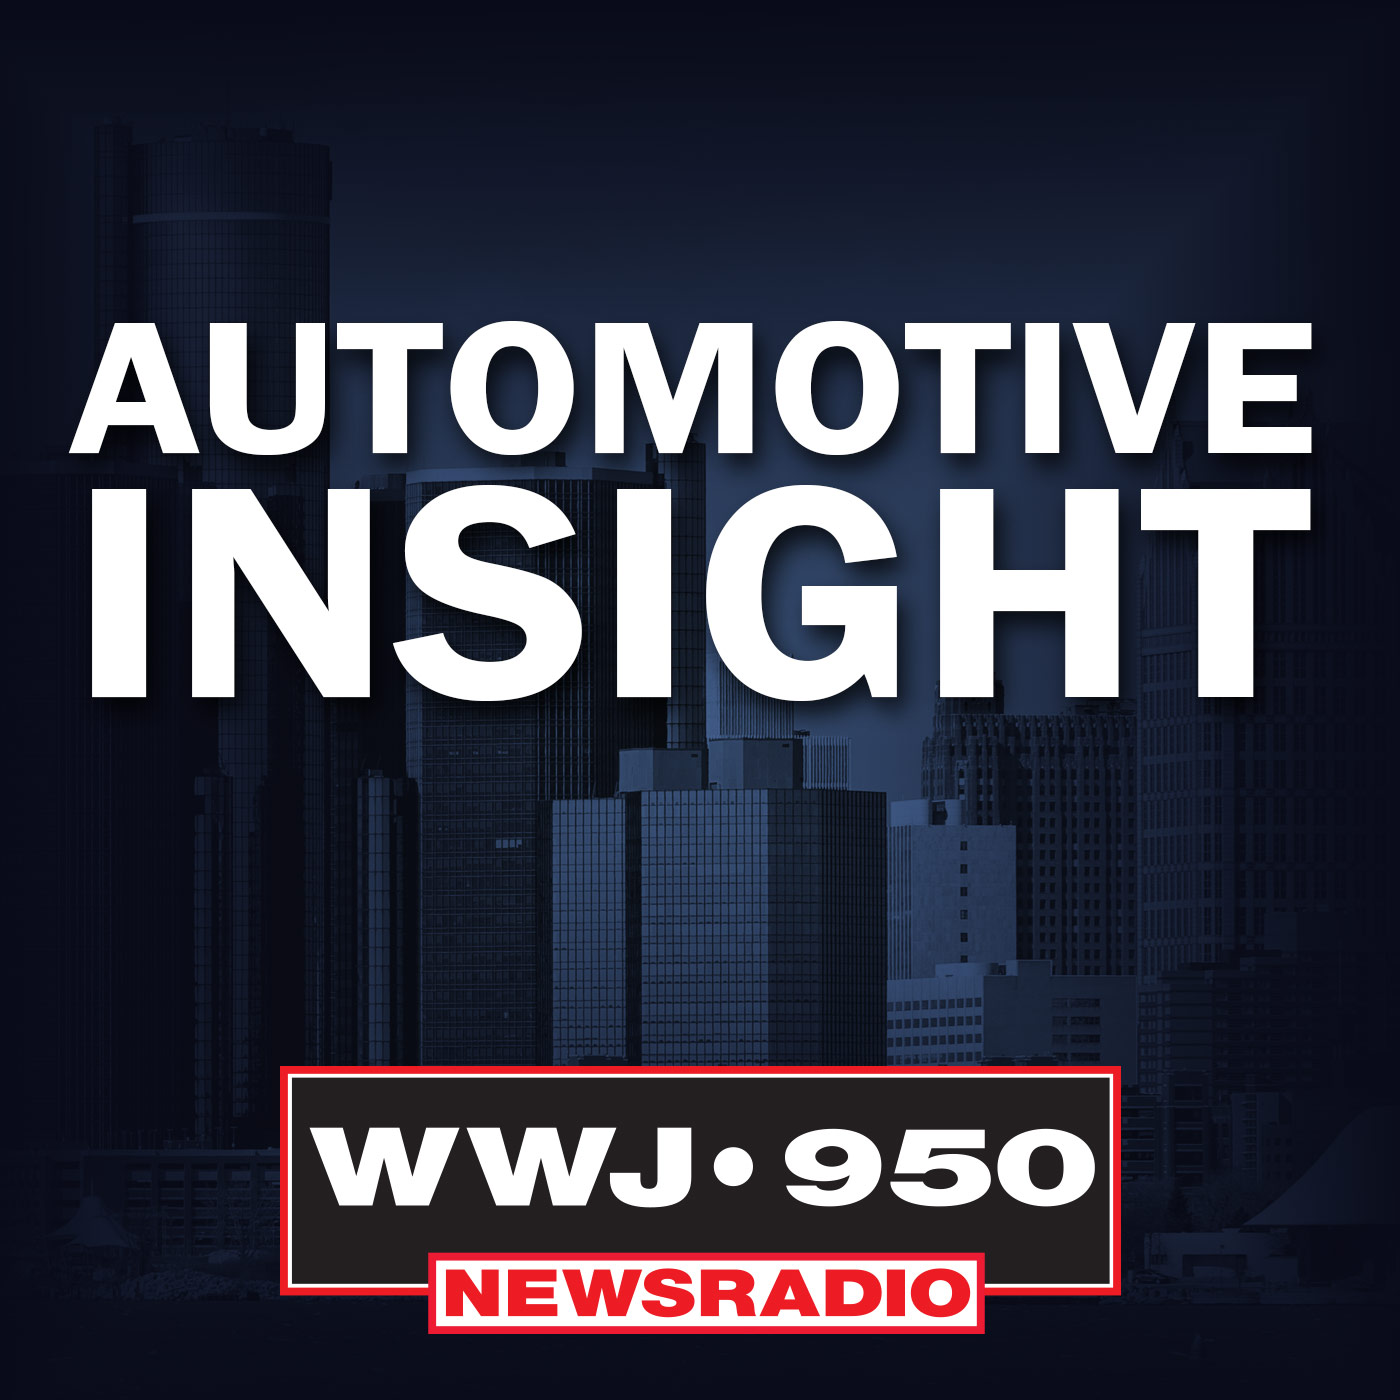 Automotive Insight - Ford wants to wipe out advertising